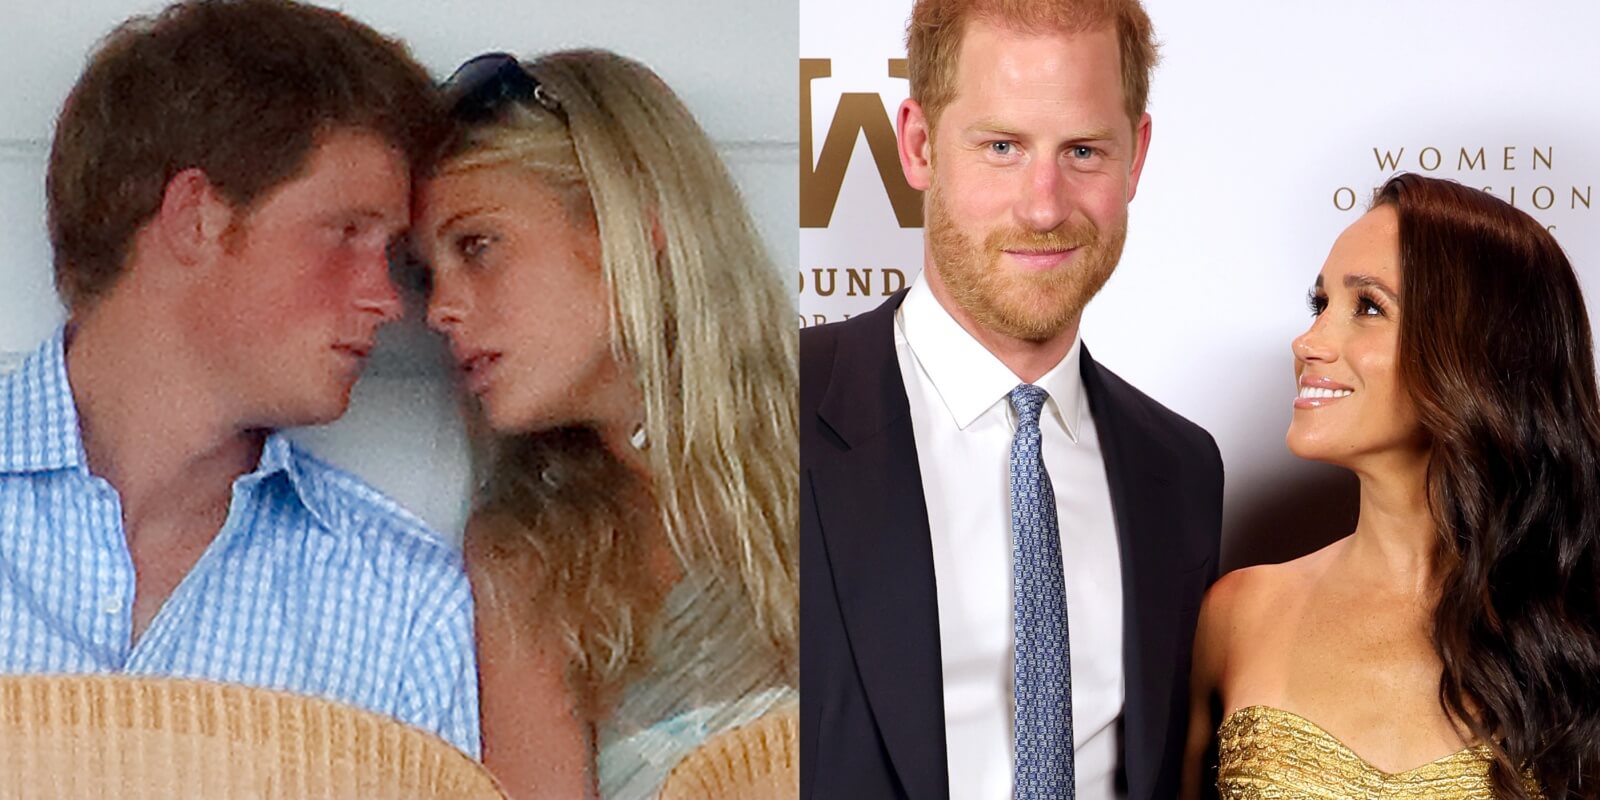 Prince Harry poses with both Chelsy Davy and Meghan Markle in separate photos.